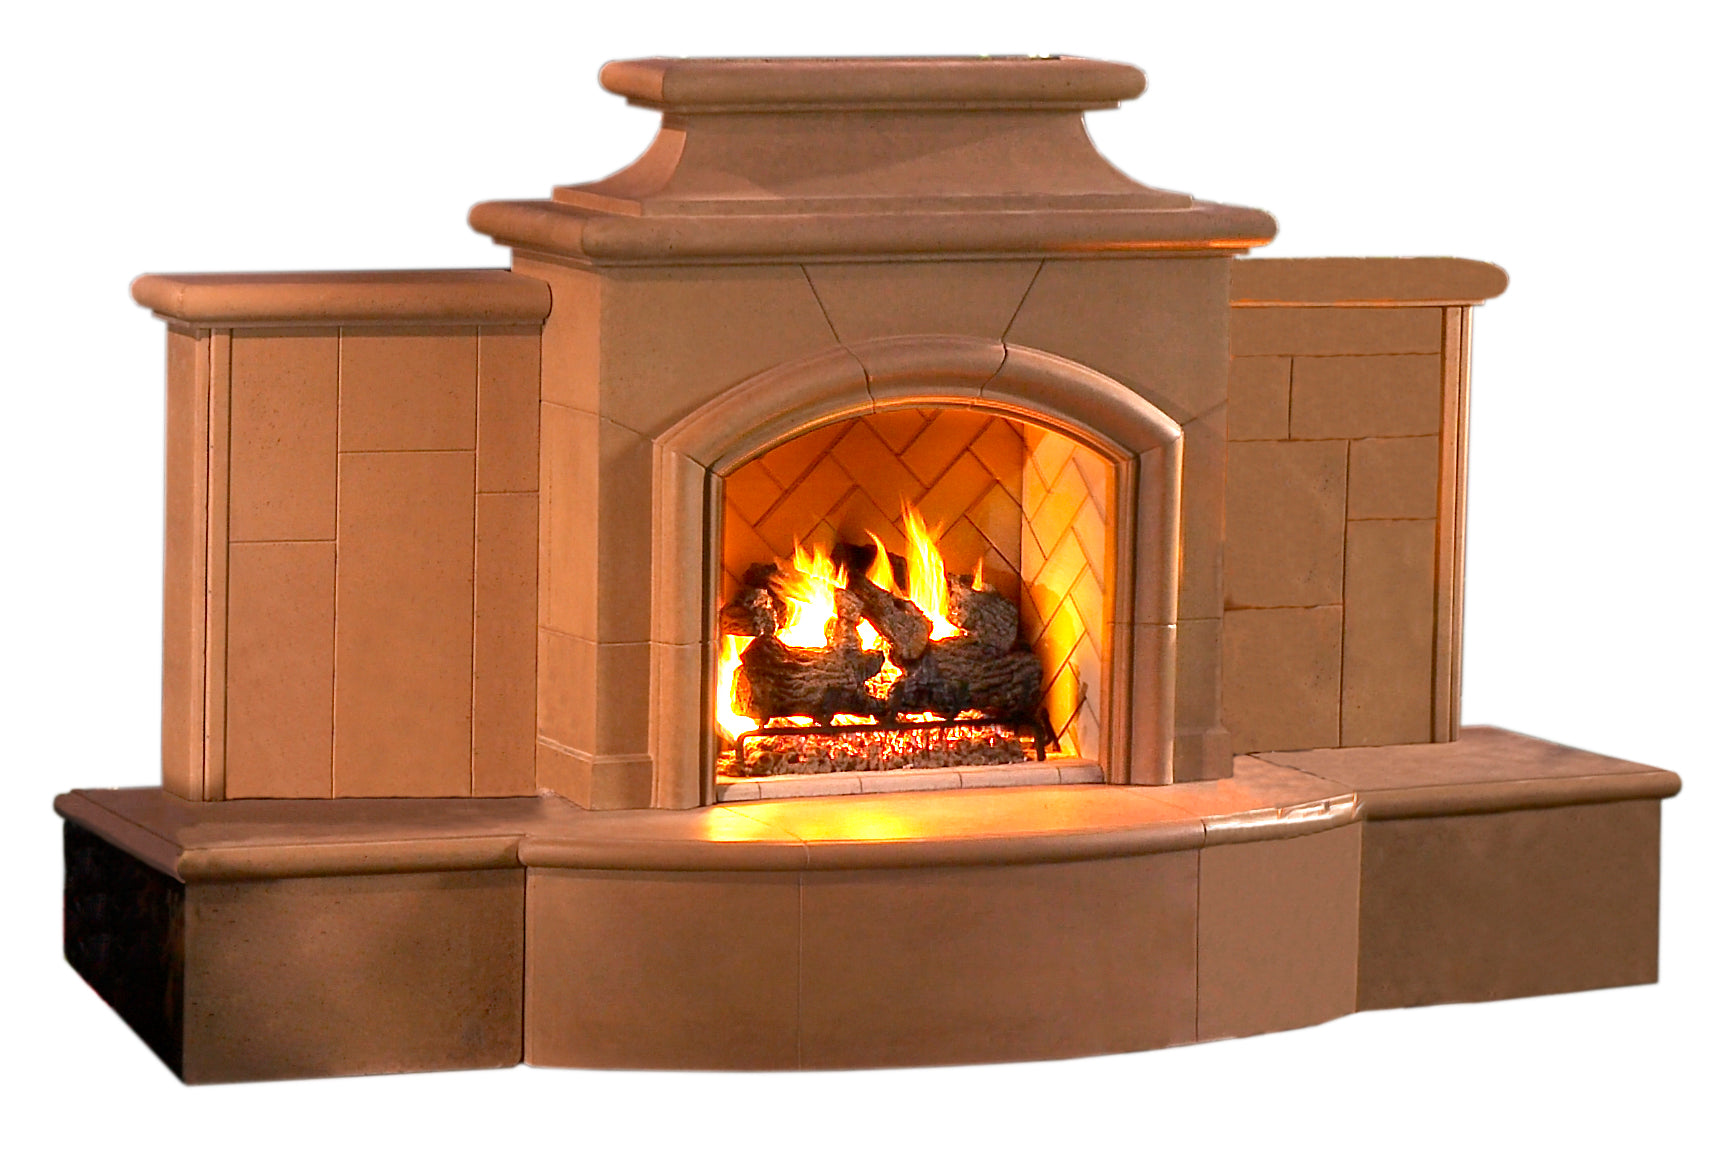 Grand Mariposa Outdoor Gas Fireplace by American Fyre Designs